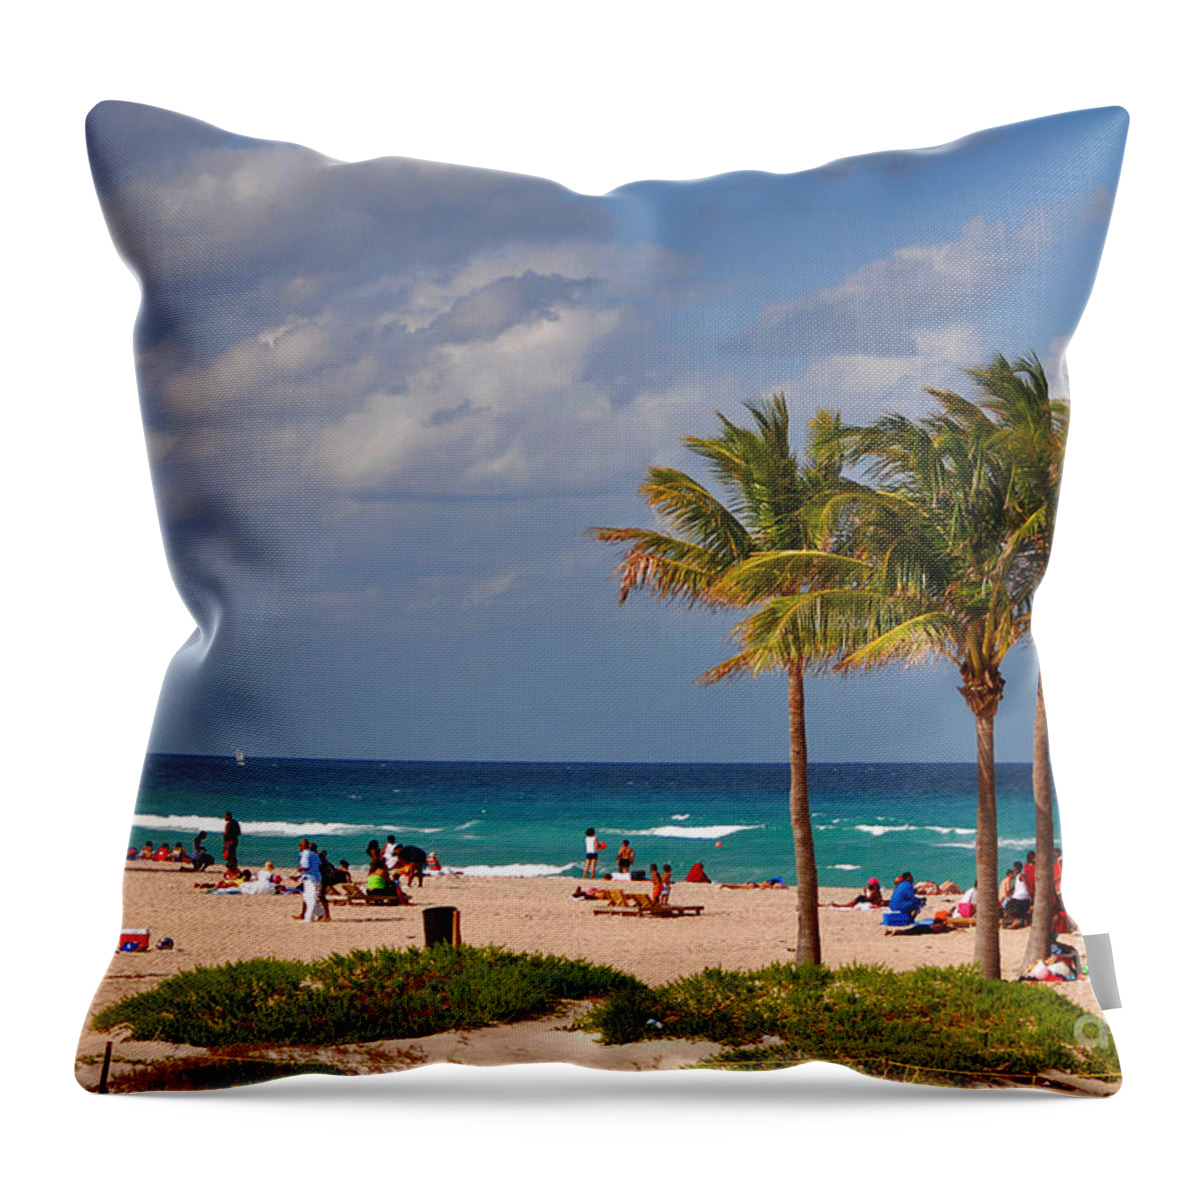 Singer Island Throw Pillow featuring the photograph 23- A Day At The Beach by Joseph Keane